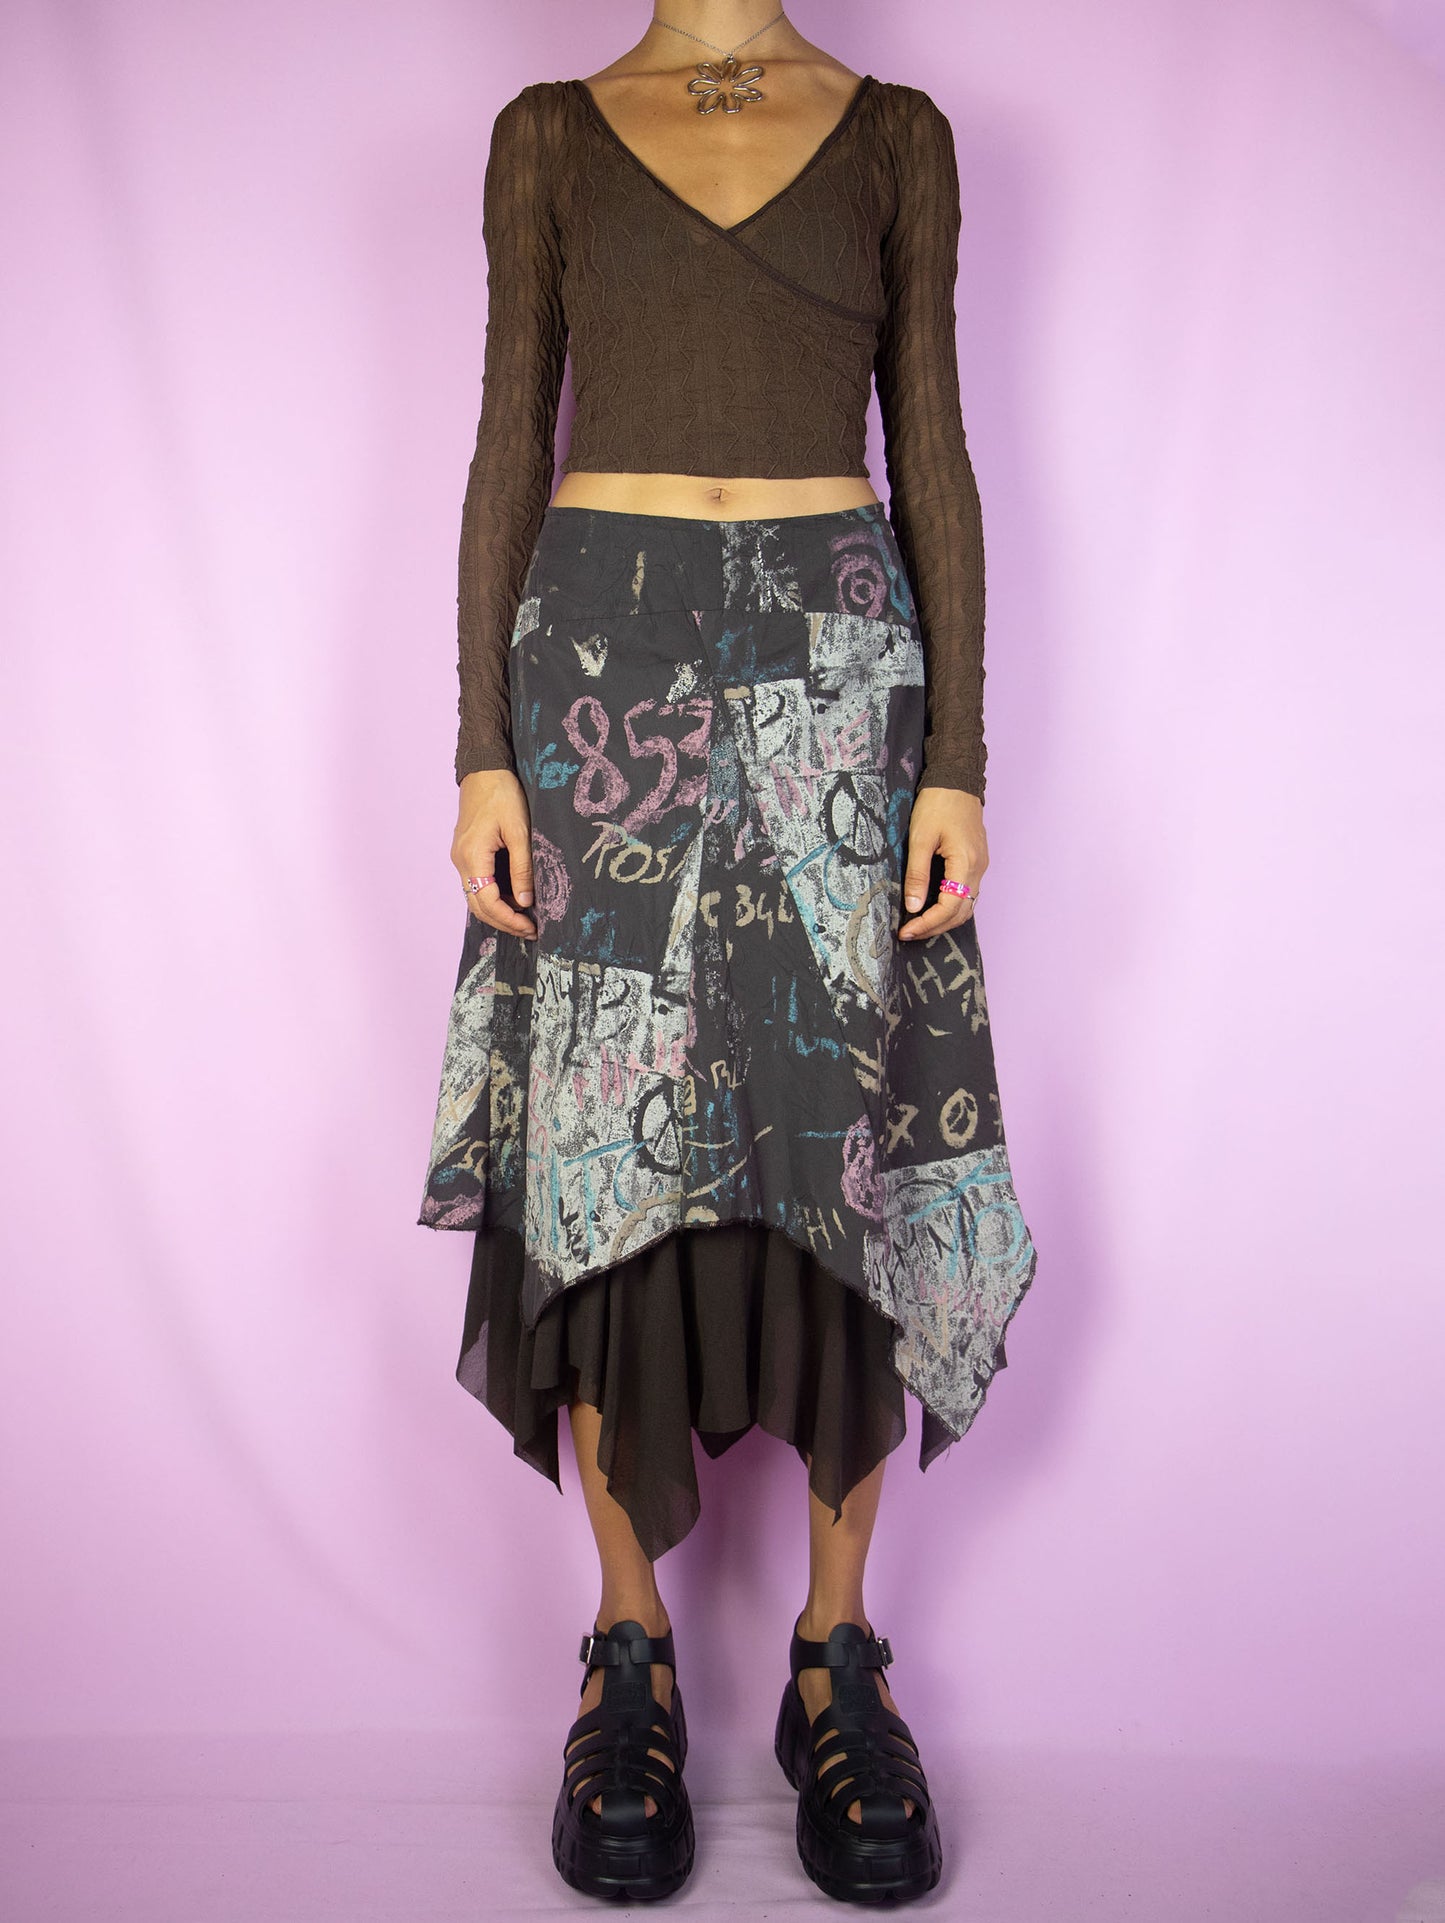 The Y2K Layered Asymmetric Midi Skirt is a vintage 2000s cyber subversive party style dark brown abstract printed skirt with a pointed asymmetrical semi-sheer mesh hem and side zipper closure. Made in France.